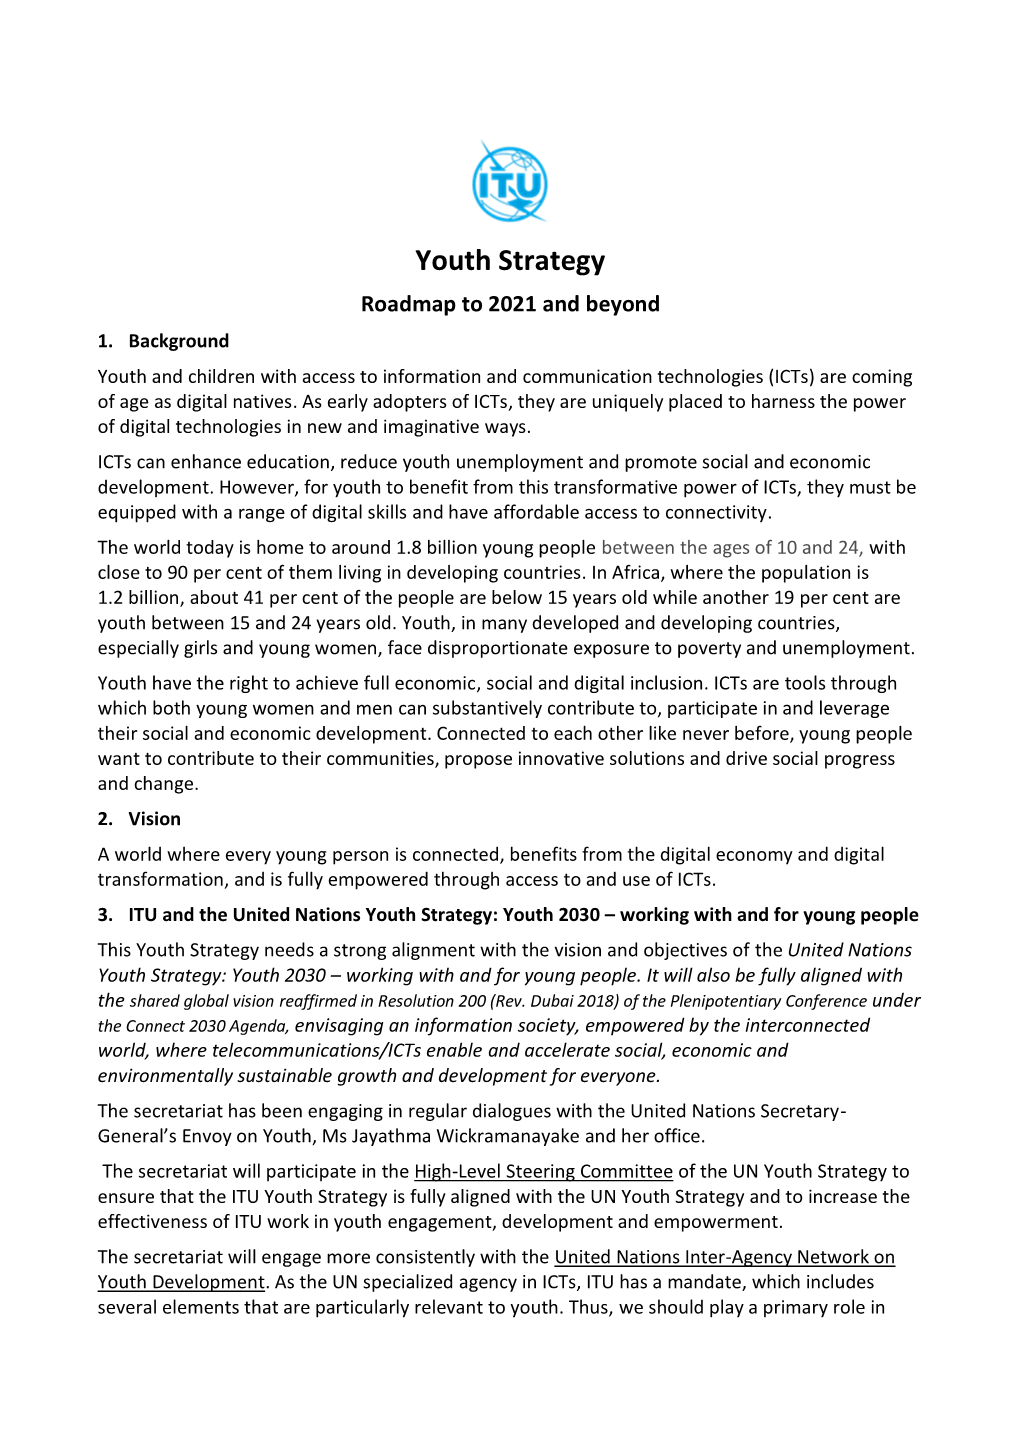 ITU Youth Strategy Is Fully Aligned with the UN Youth Strategy and to Increase the Effectiveness of ITU Work in Youth Engagement, Development and Empowerment